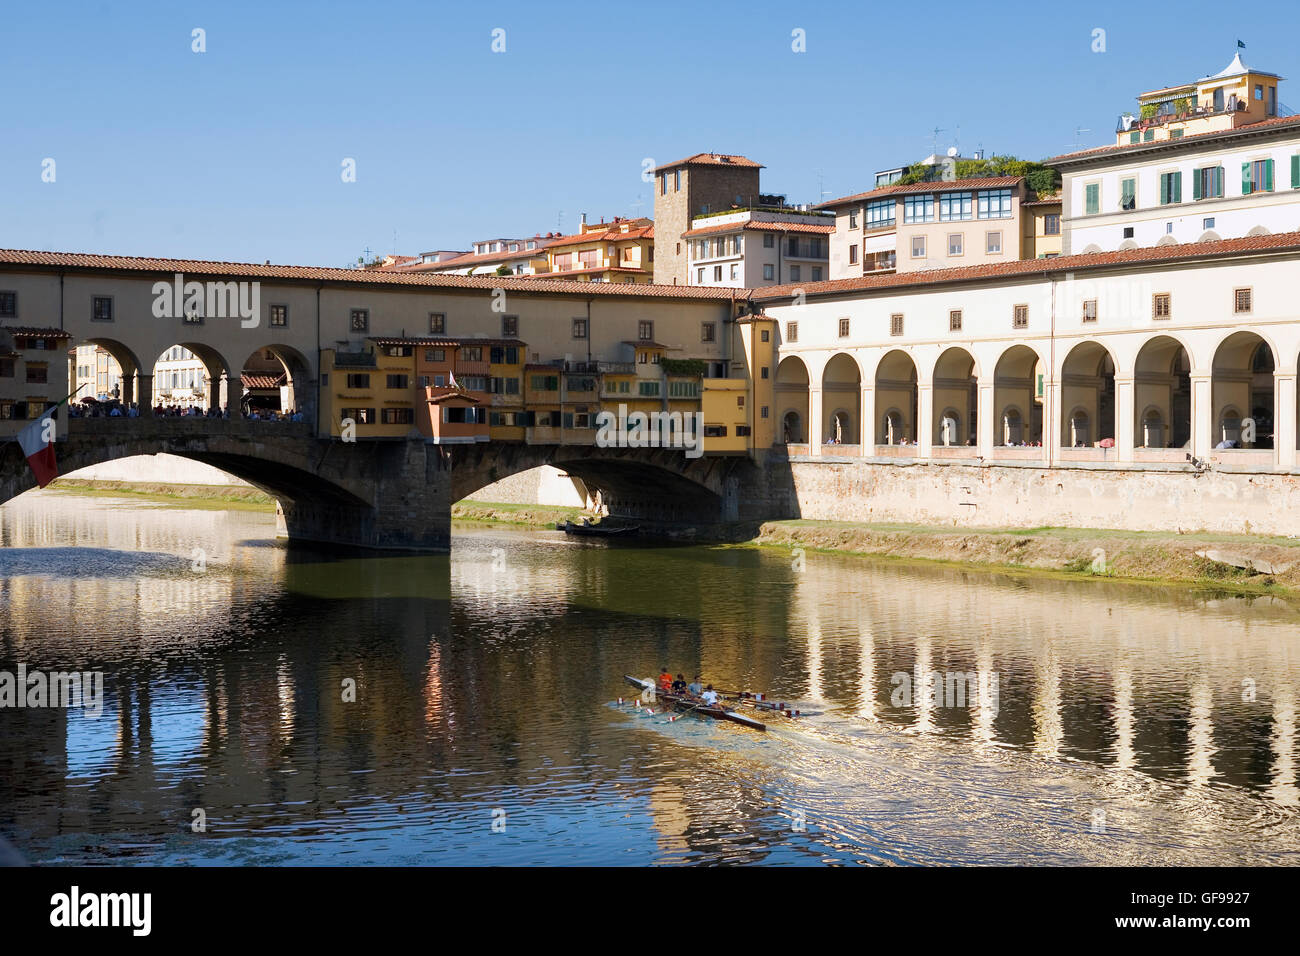 River Arno in Florence, Tuscany, Italy, from Lungarno Torrigiani in Oltrarno, with the Ponte Vecchio spanning the river Stock Photo